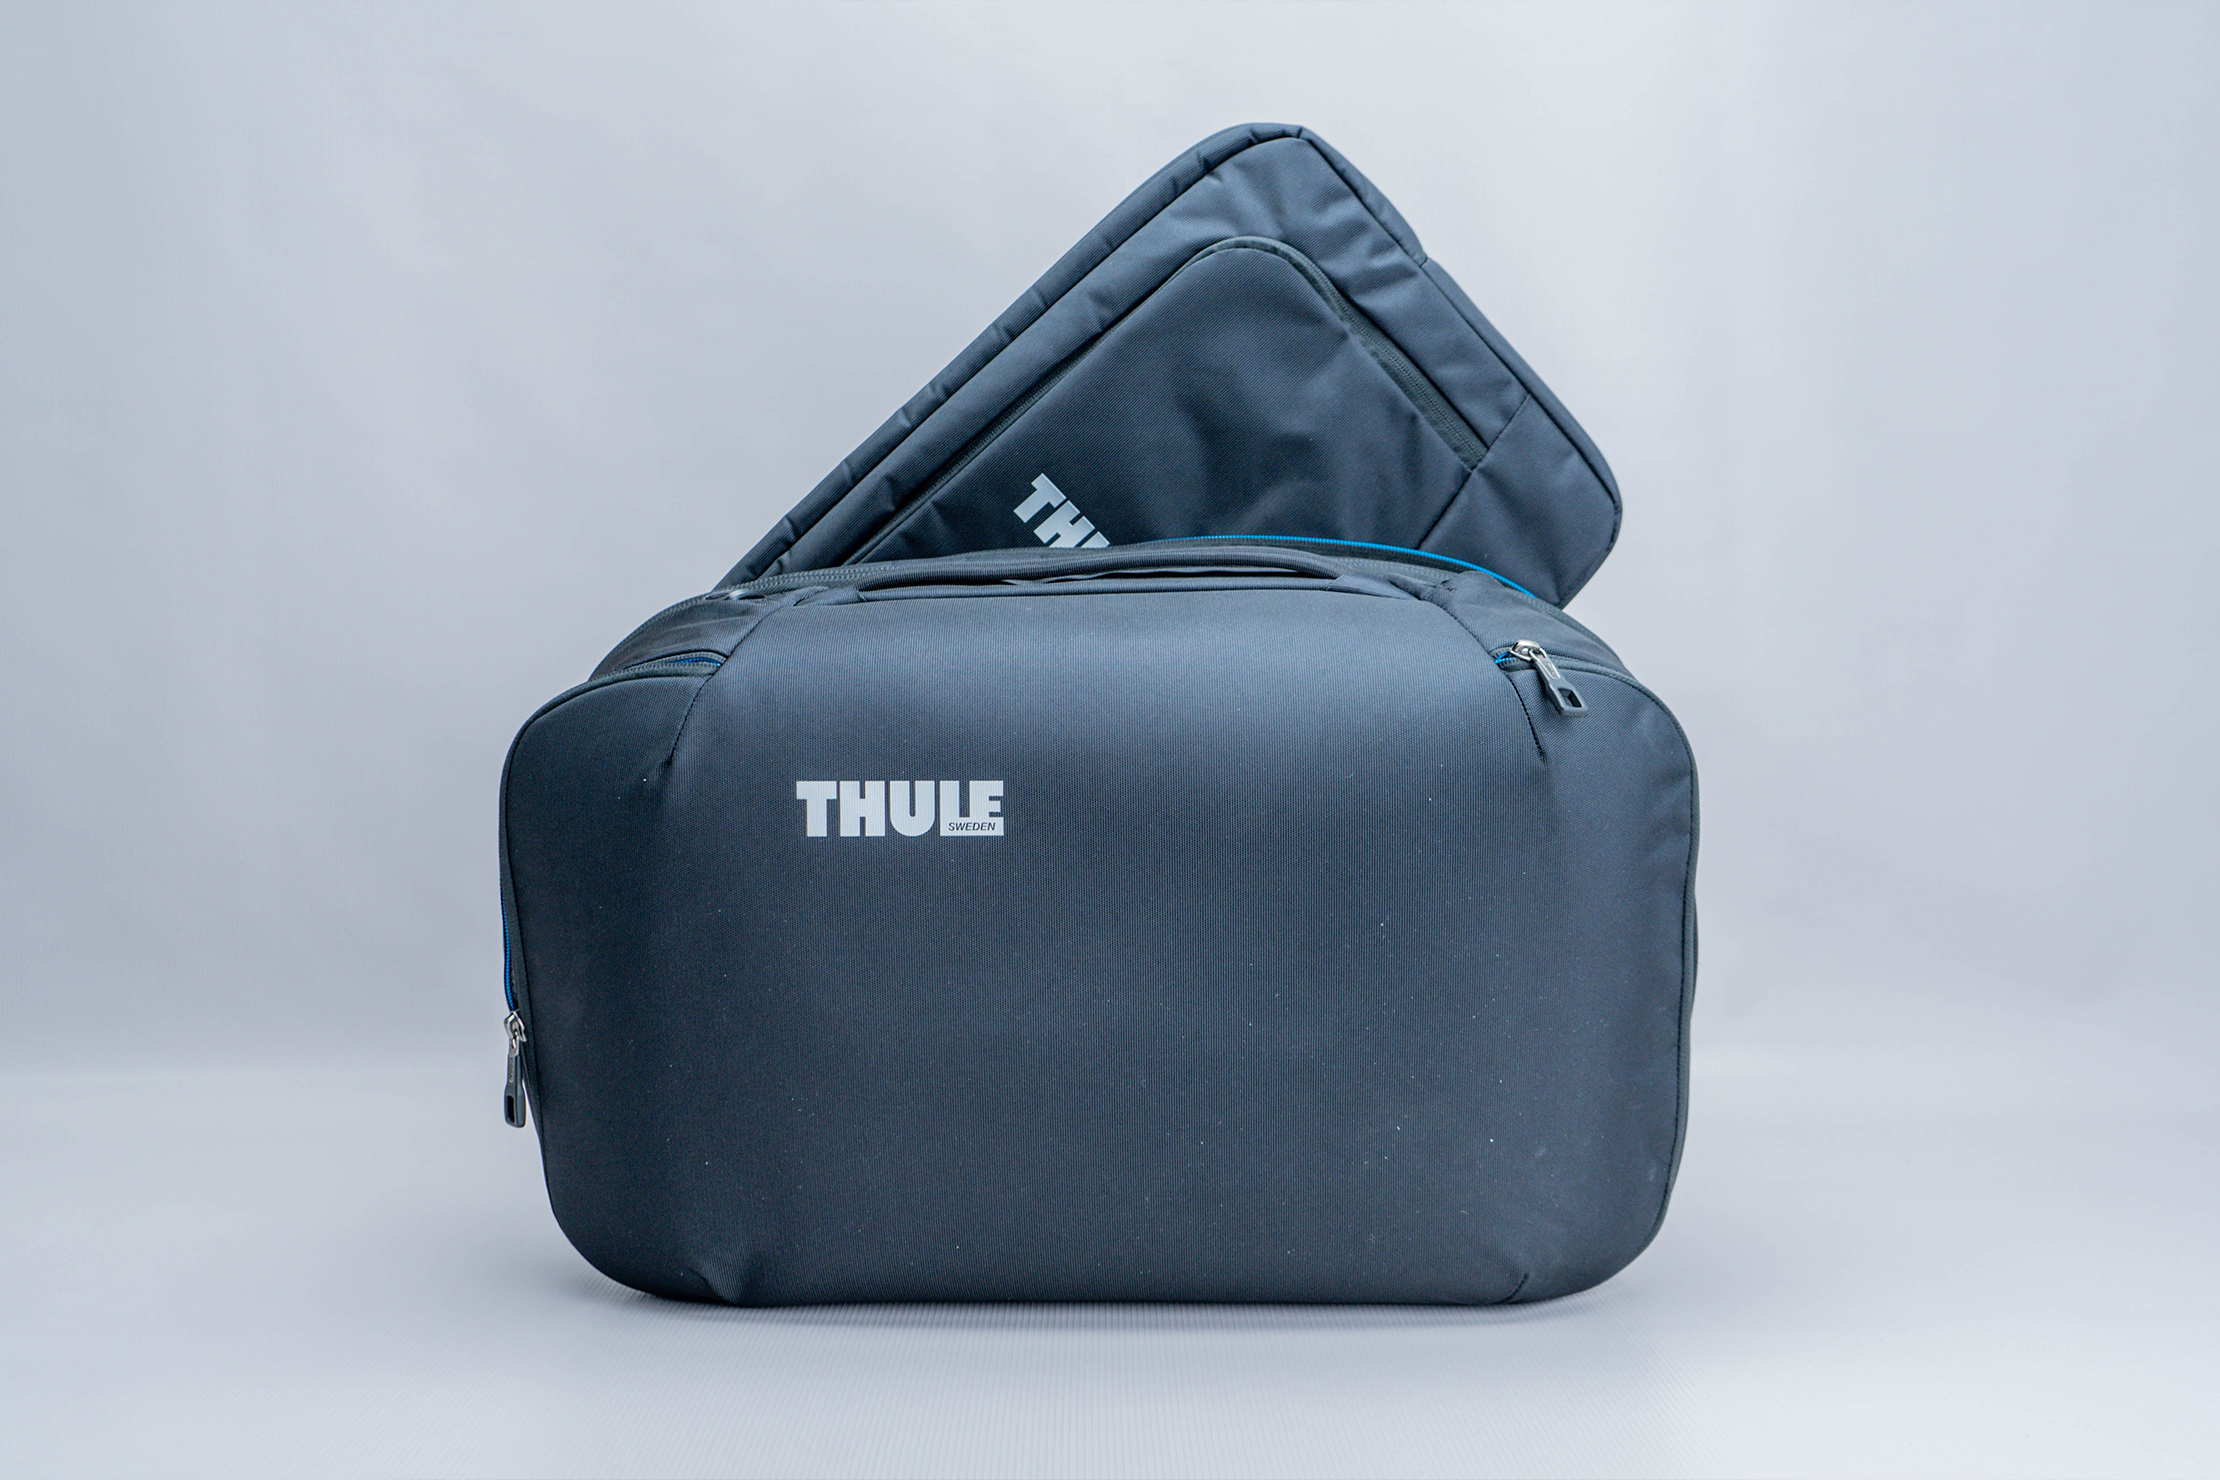 Thule Subterra Convertible Carry-On Strap 2 Bags